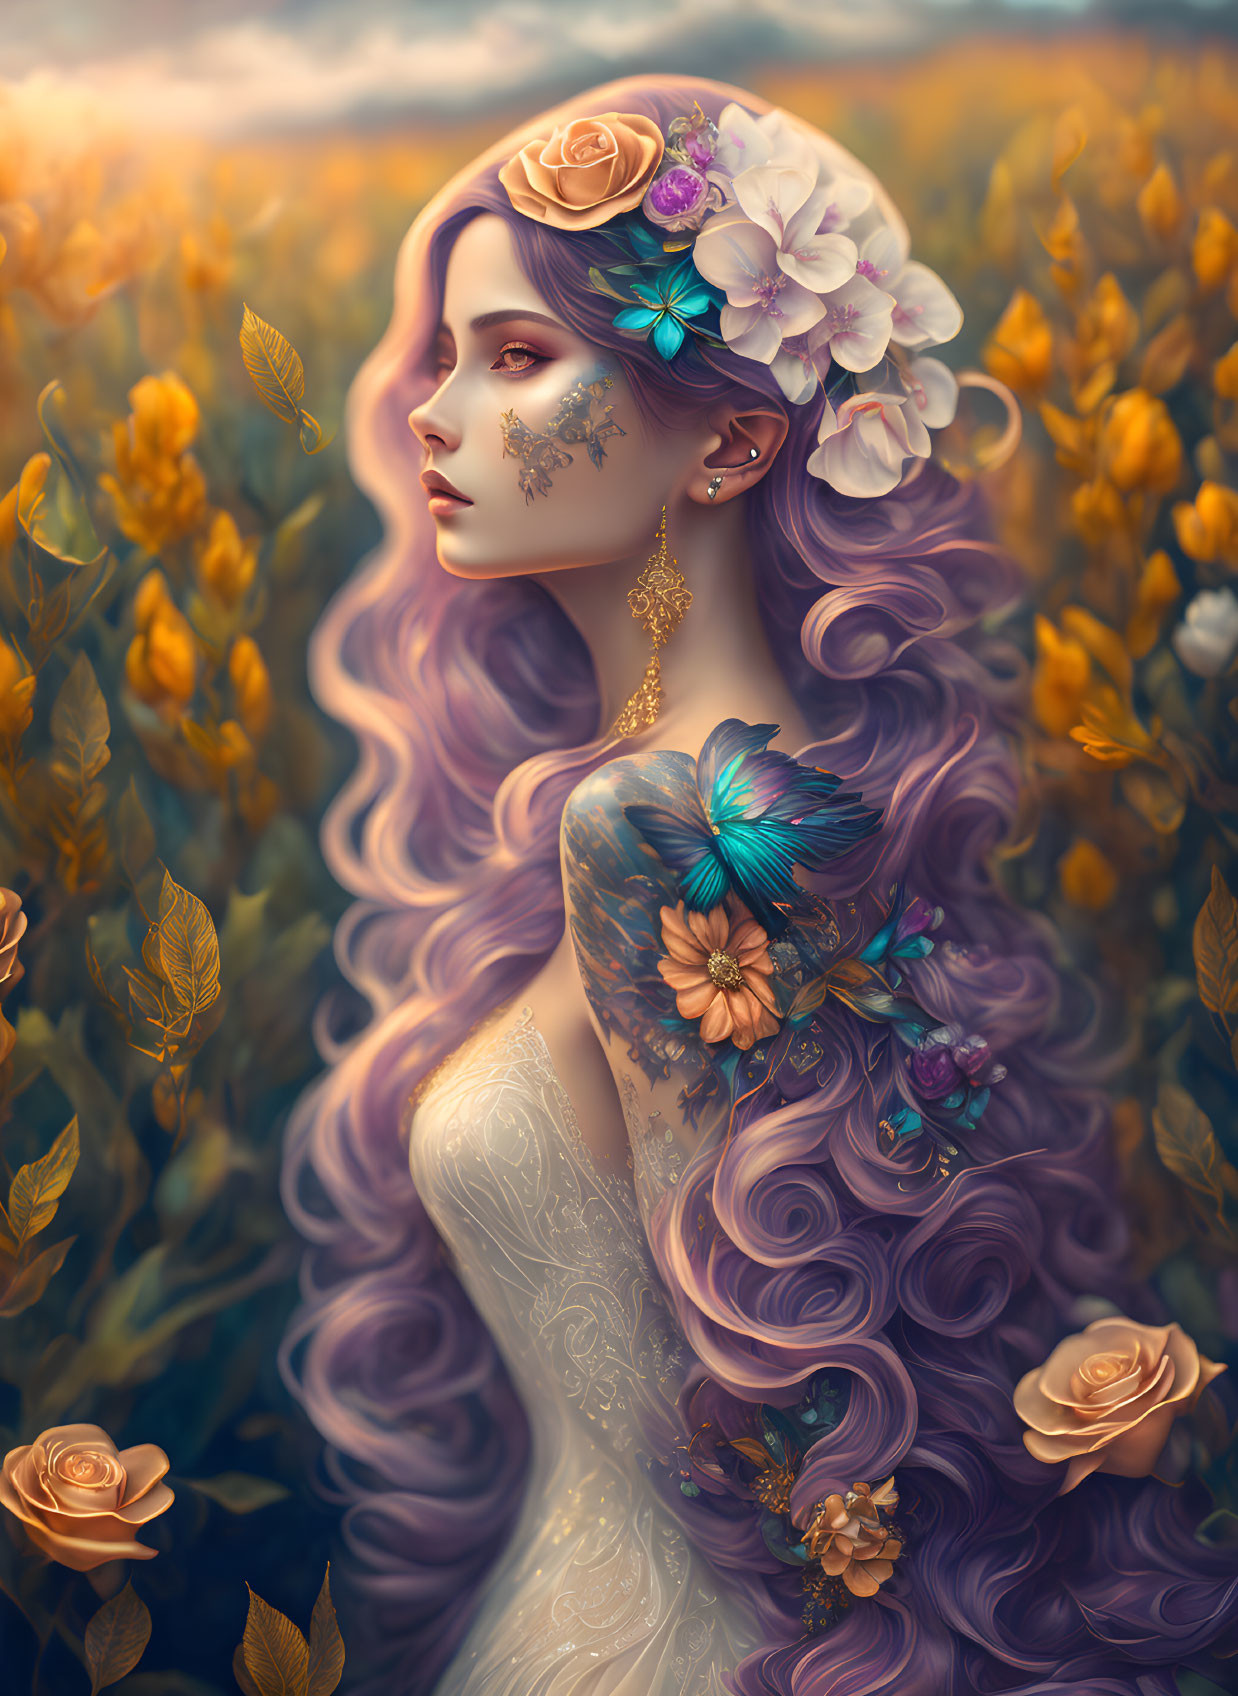 Digital artwork: Woman with lavender hair in white dress, surrounded by golden flowers and butterfly.